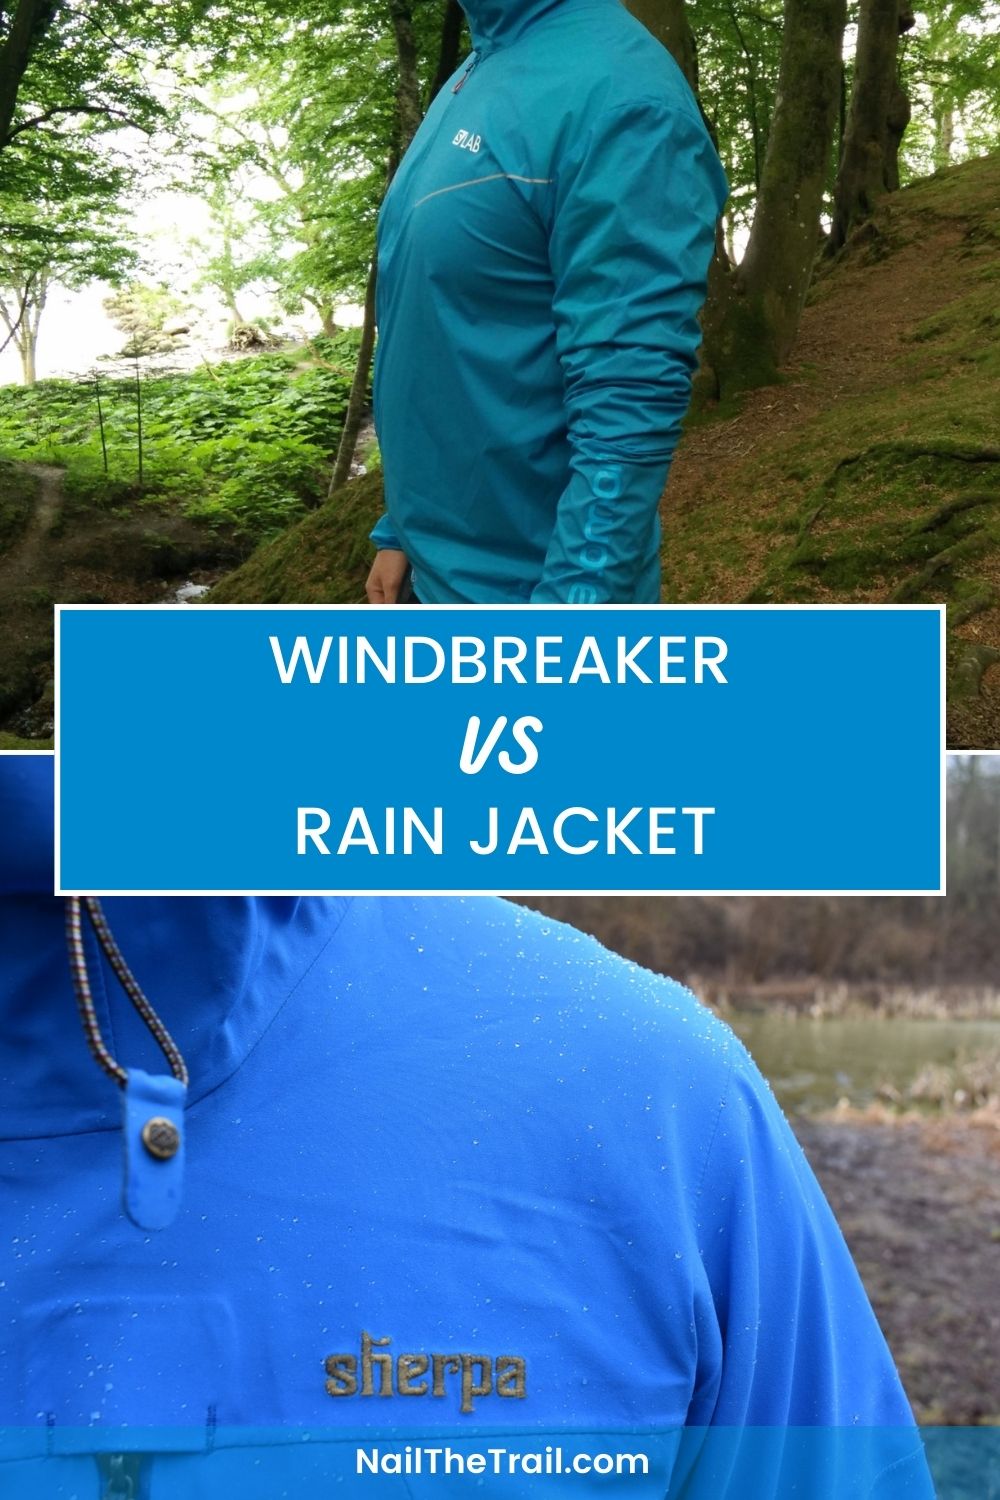 What is a spray jacket?